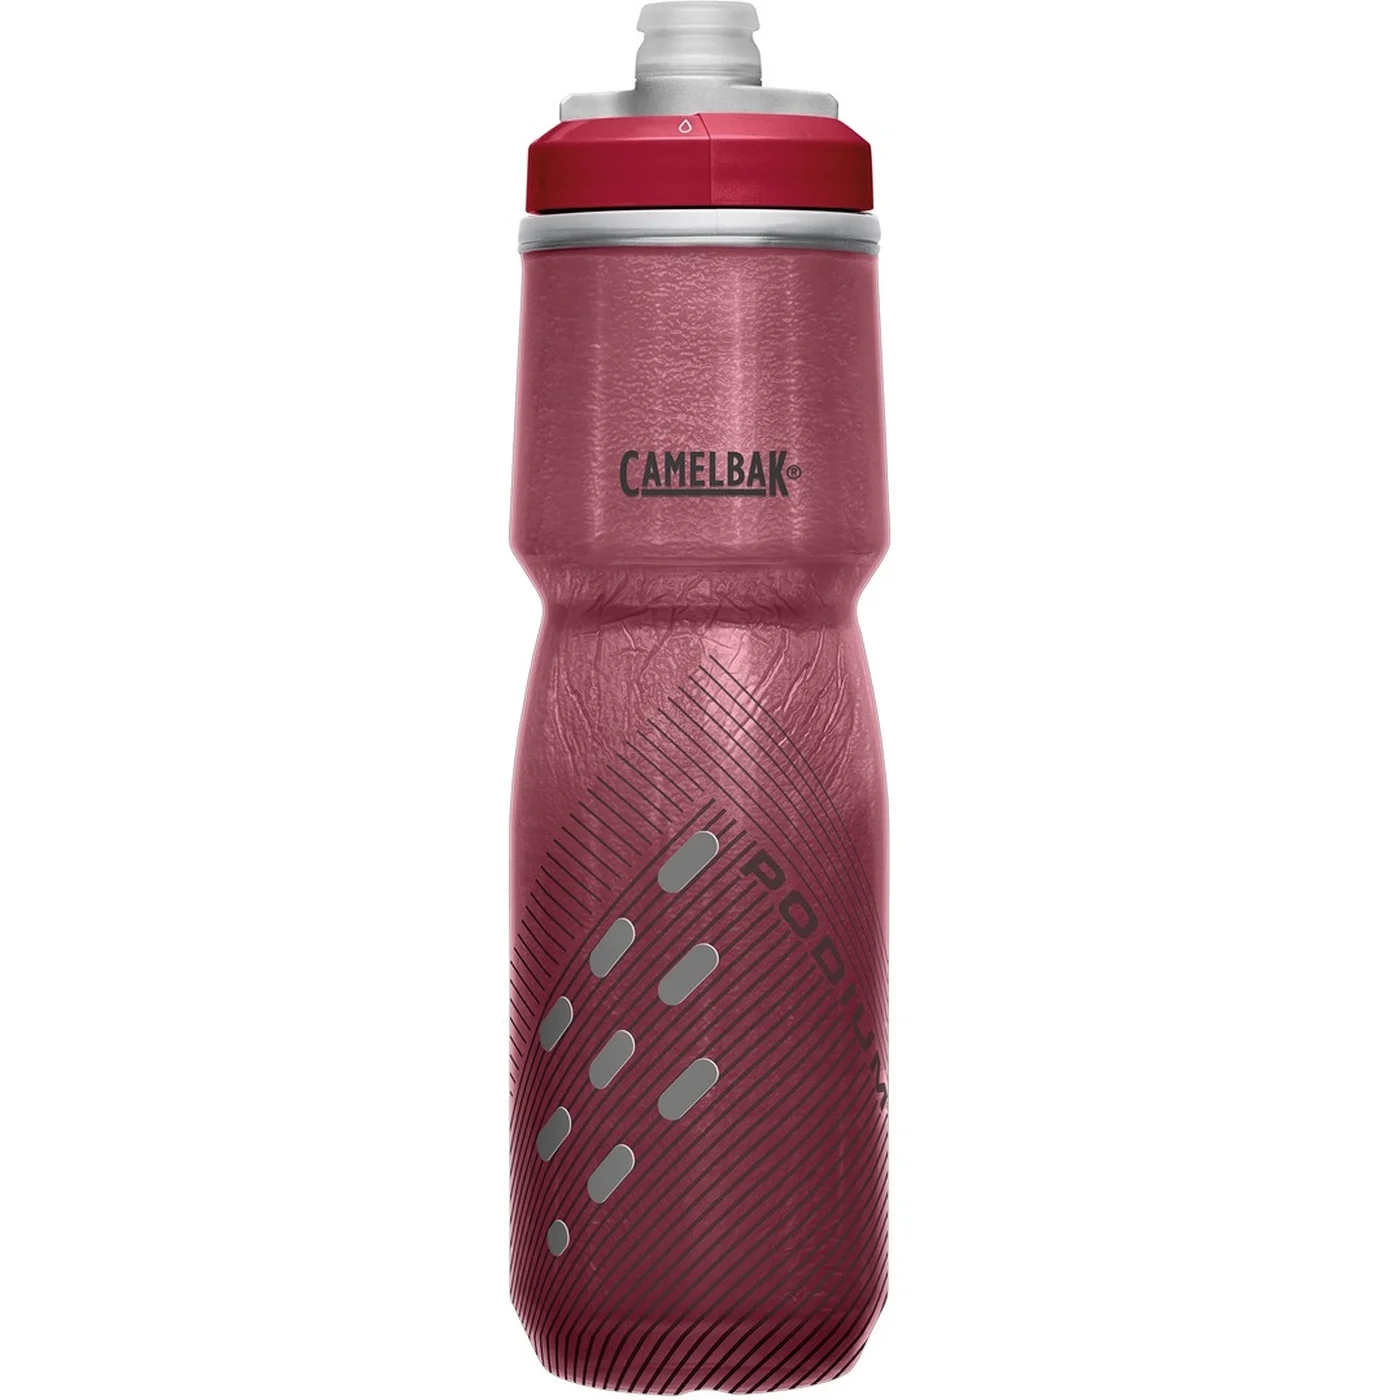 CAMELBAK TRINKFLASCHE PODIUM CHILL burgundy perforated 5p7vgzAm